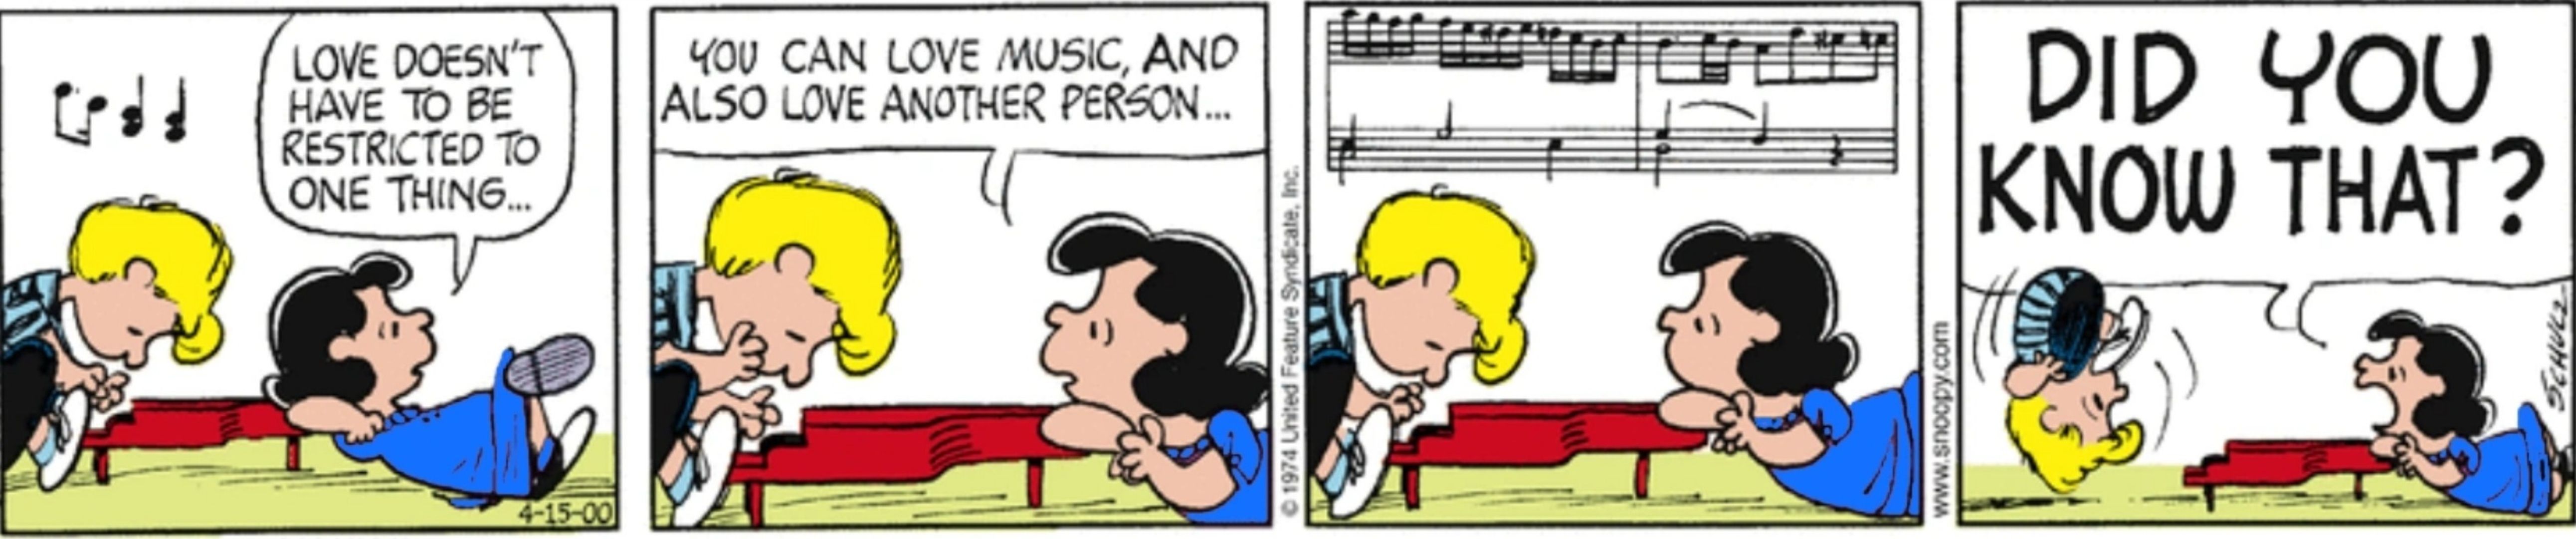 Lucy and Schroeder in peanuts.